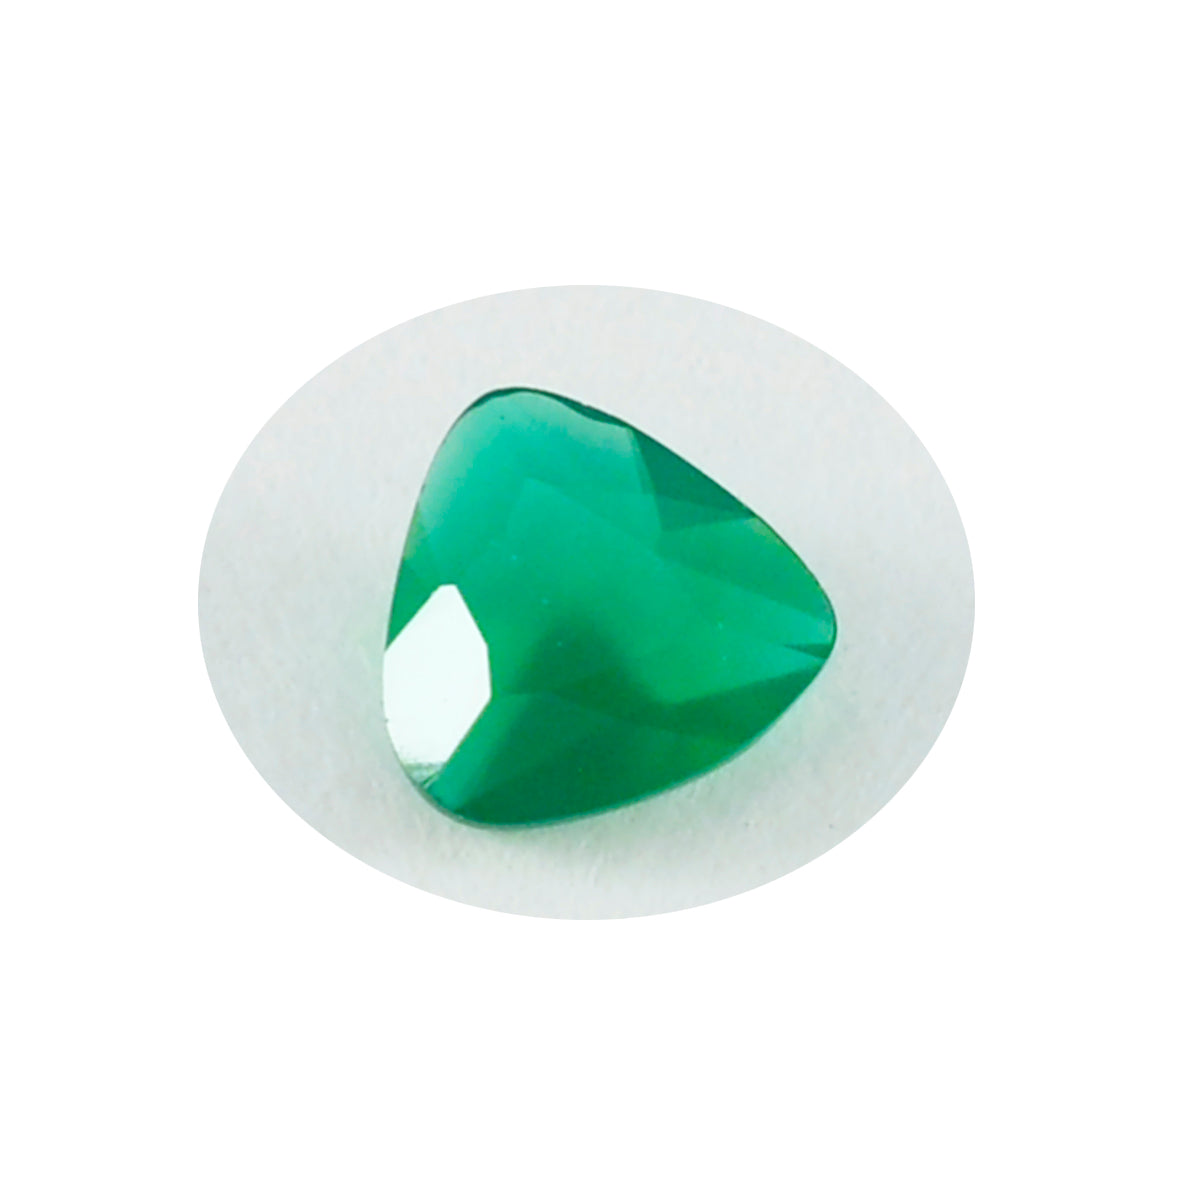 Riyogems 1PC Natural Green Onyx Faceted 12x12 mm Trillion Shape beauty Quality Loose Gems